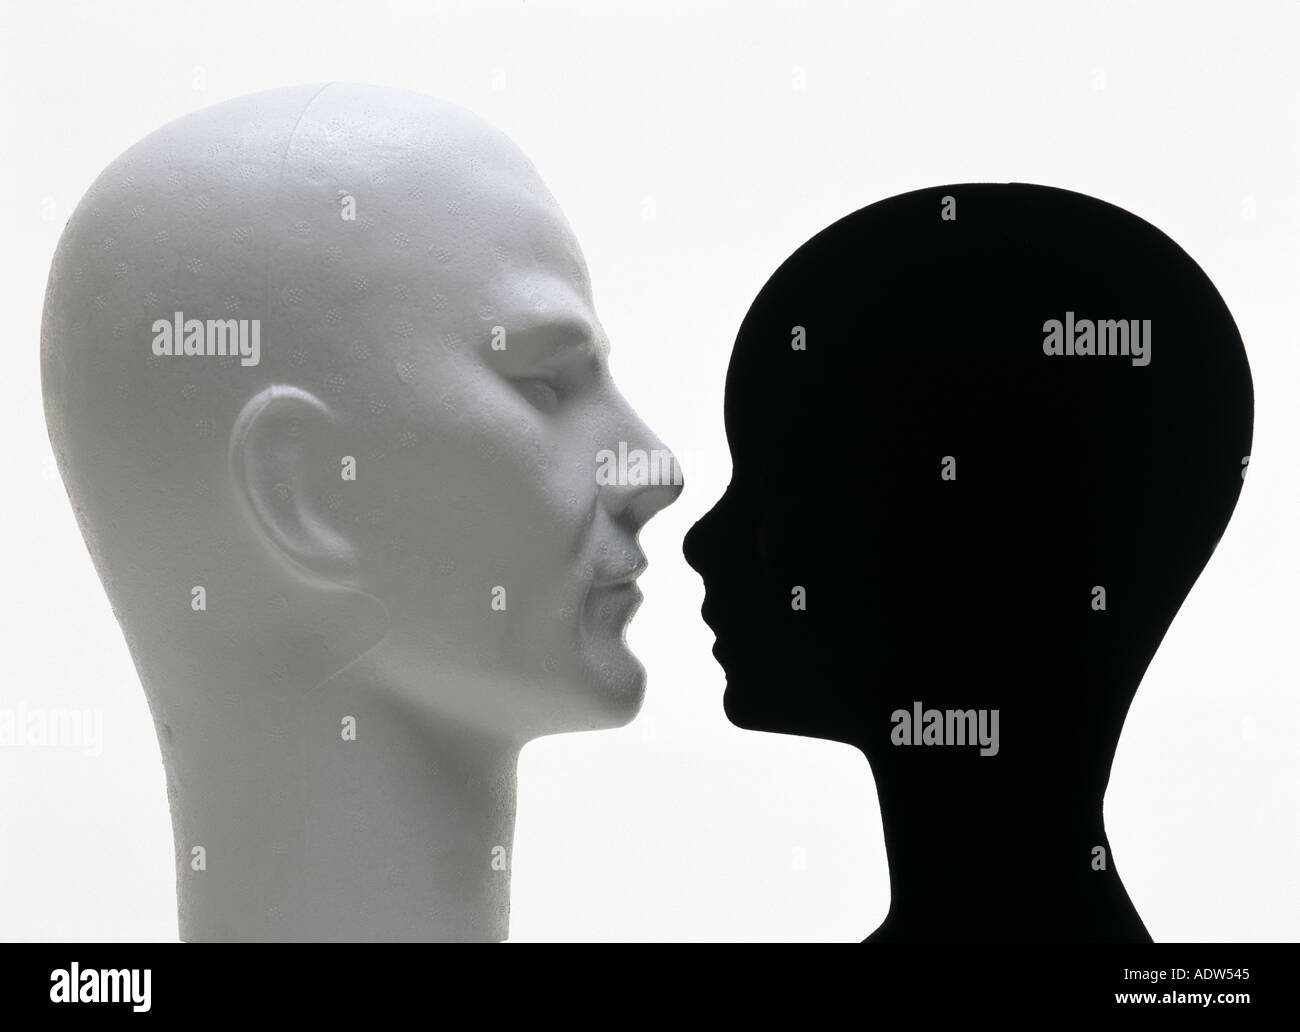 WHITE AND BLACK MANNEQUIN HEADS Stock Photo